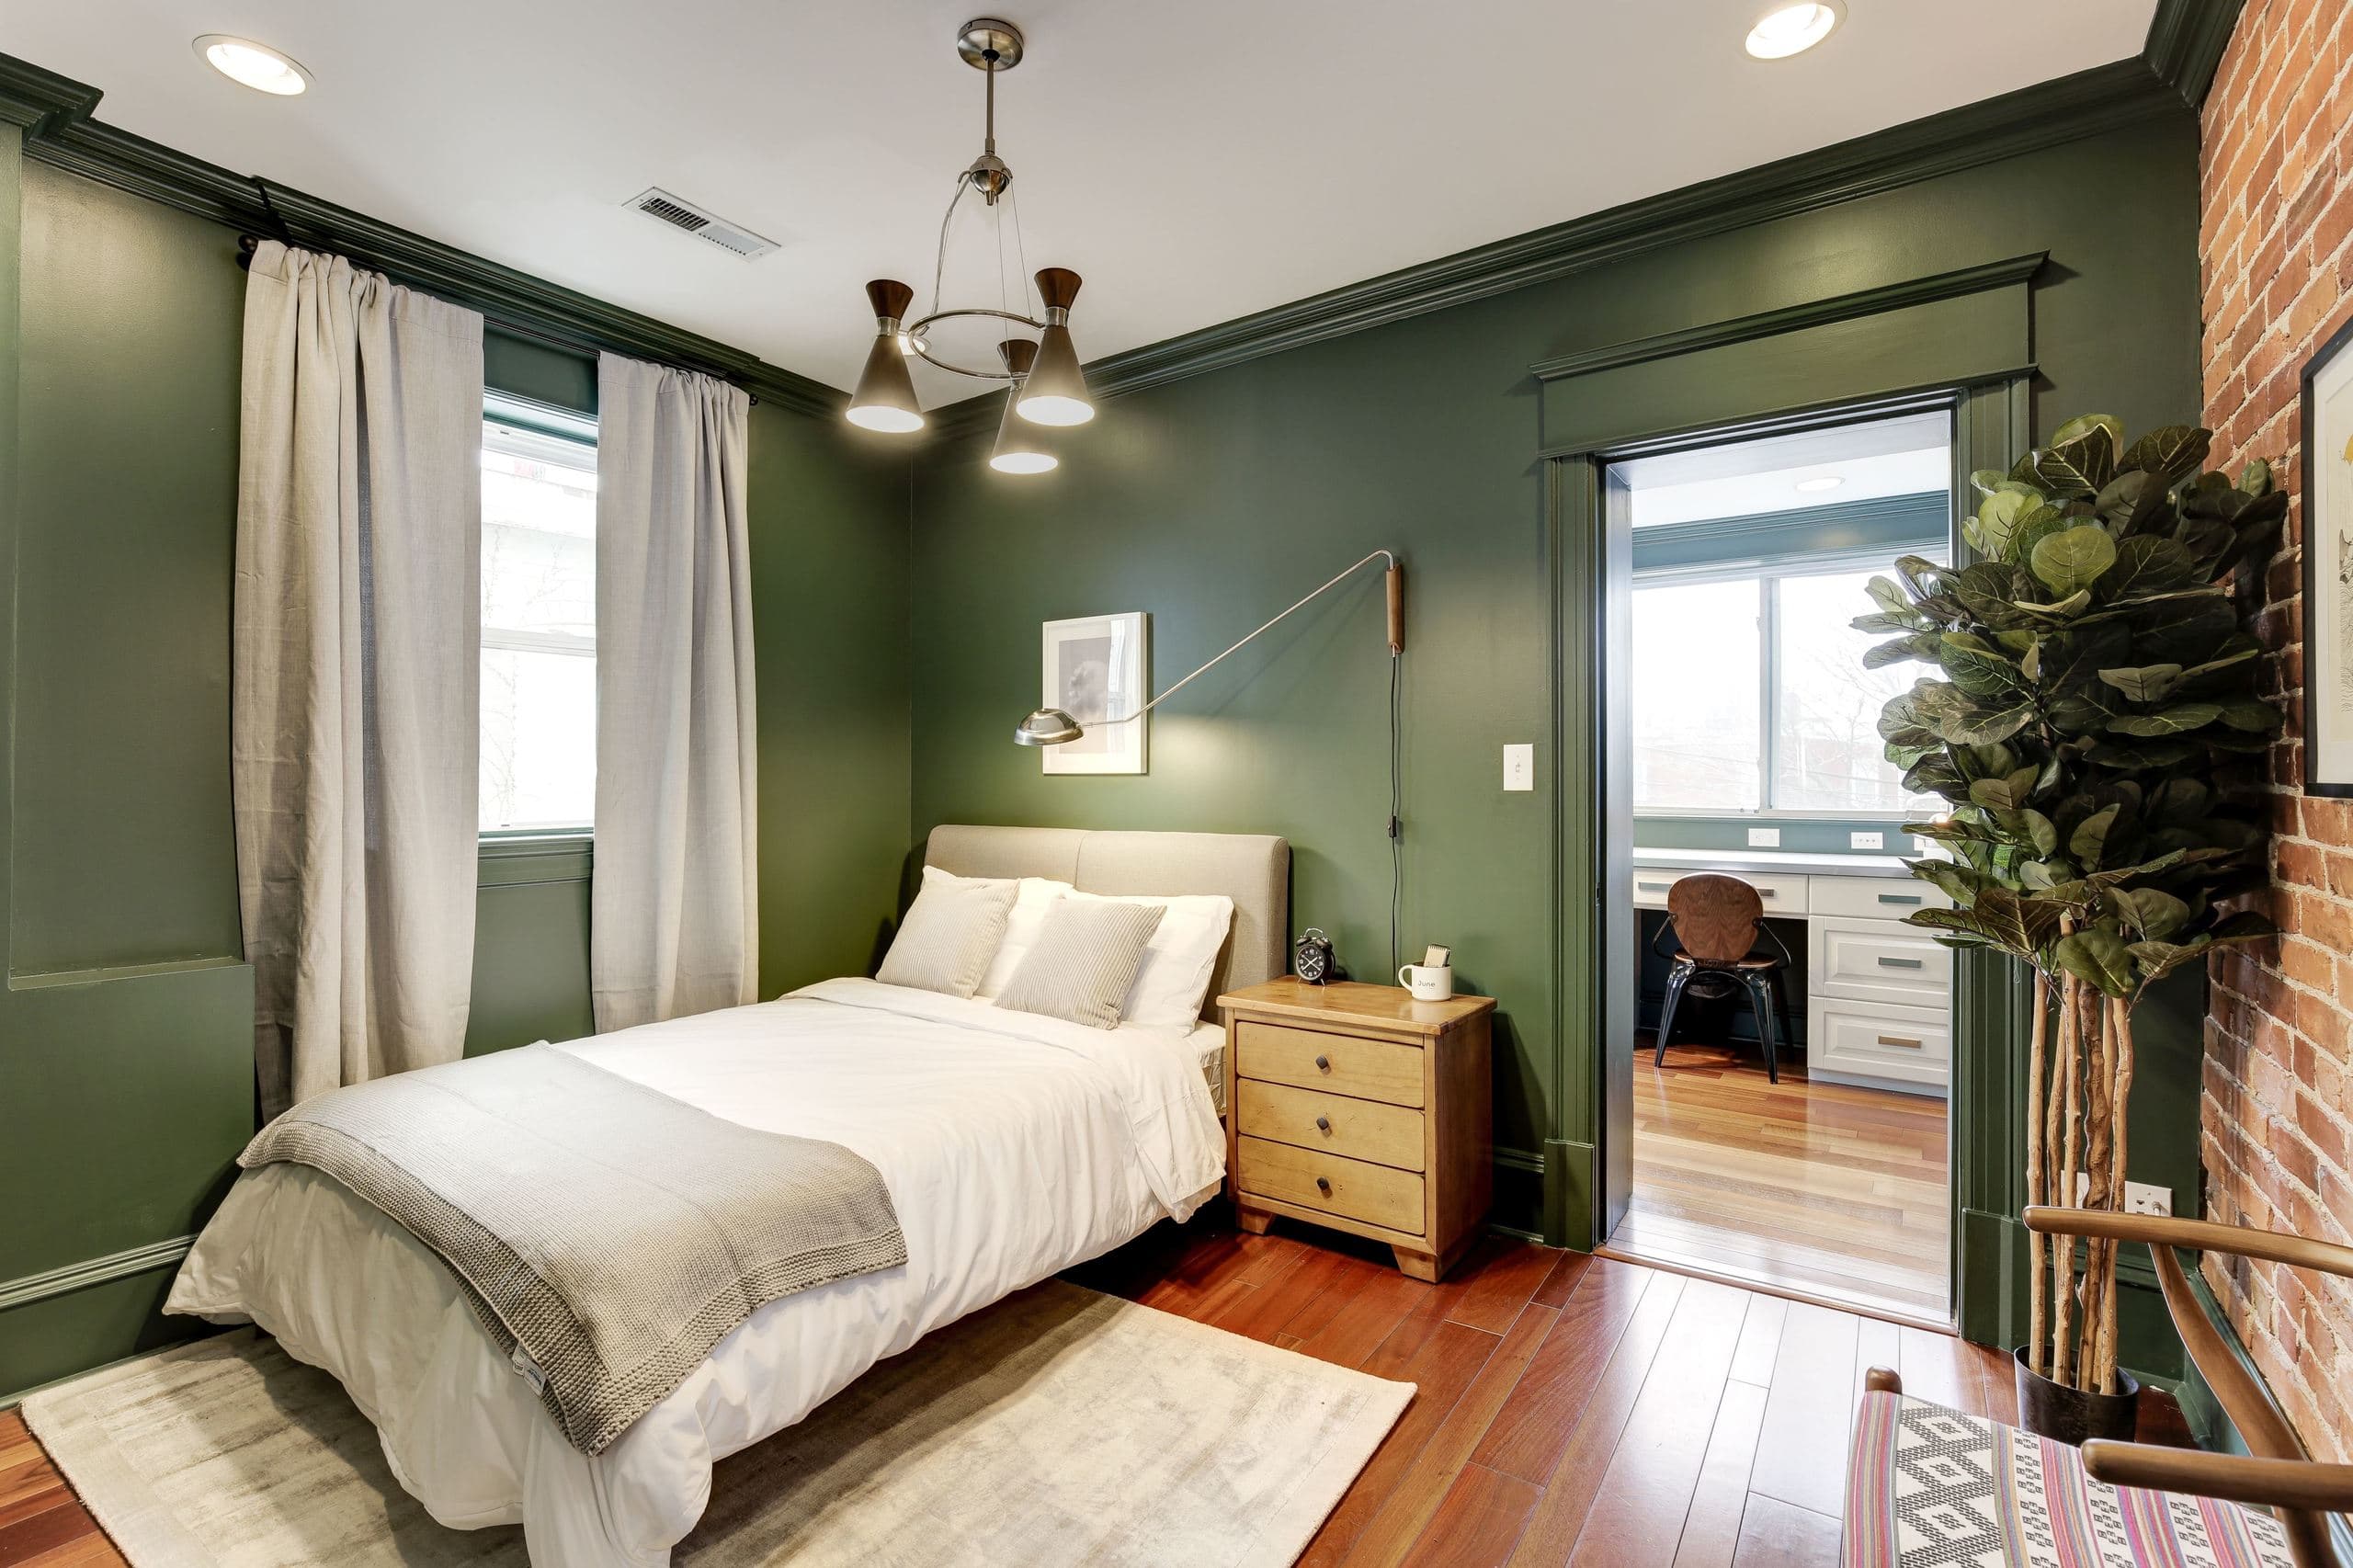 Photo 24 of #187: Queen Bedroom A at June Homes